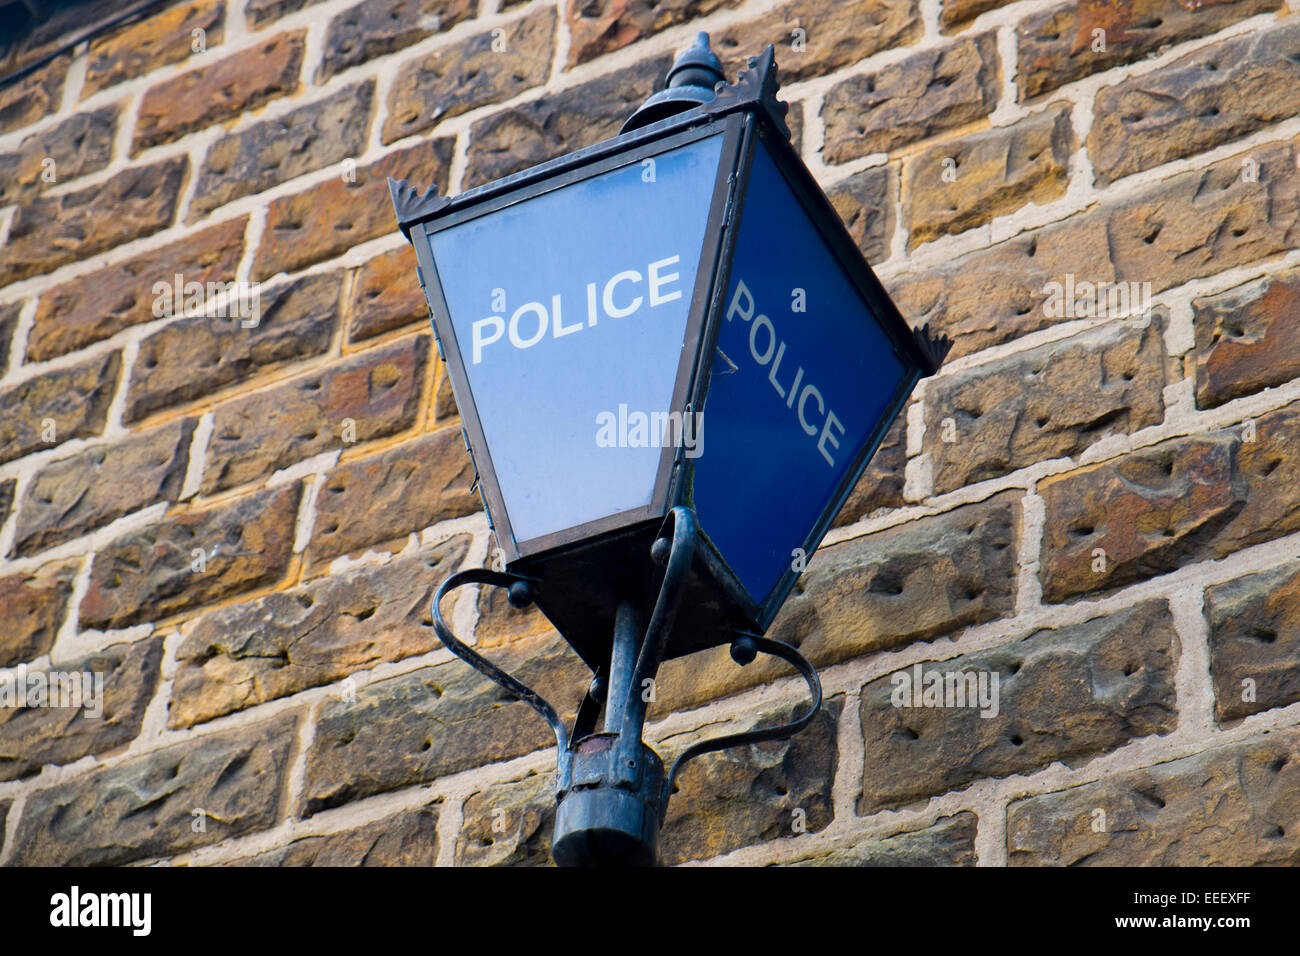 Local police station blue light in the market town of Bakewell, Peak District, Derbyshire, England, United Kingdom Stock Photo